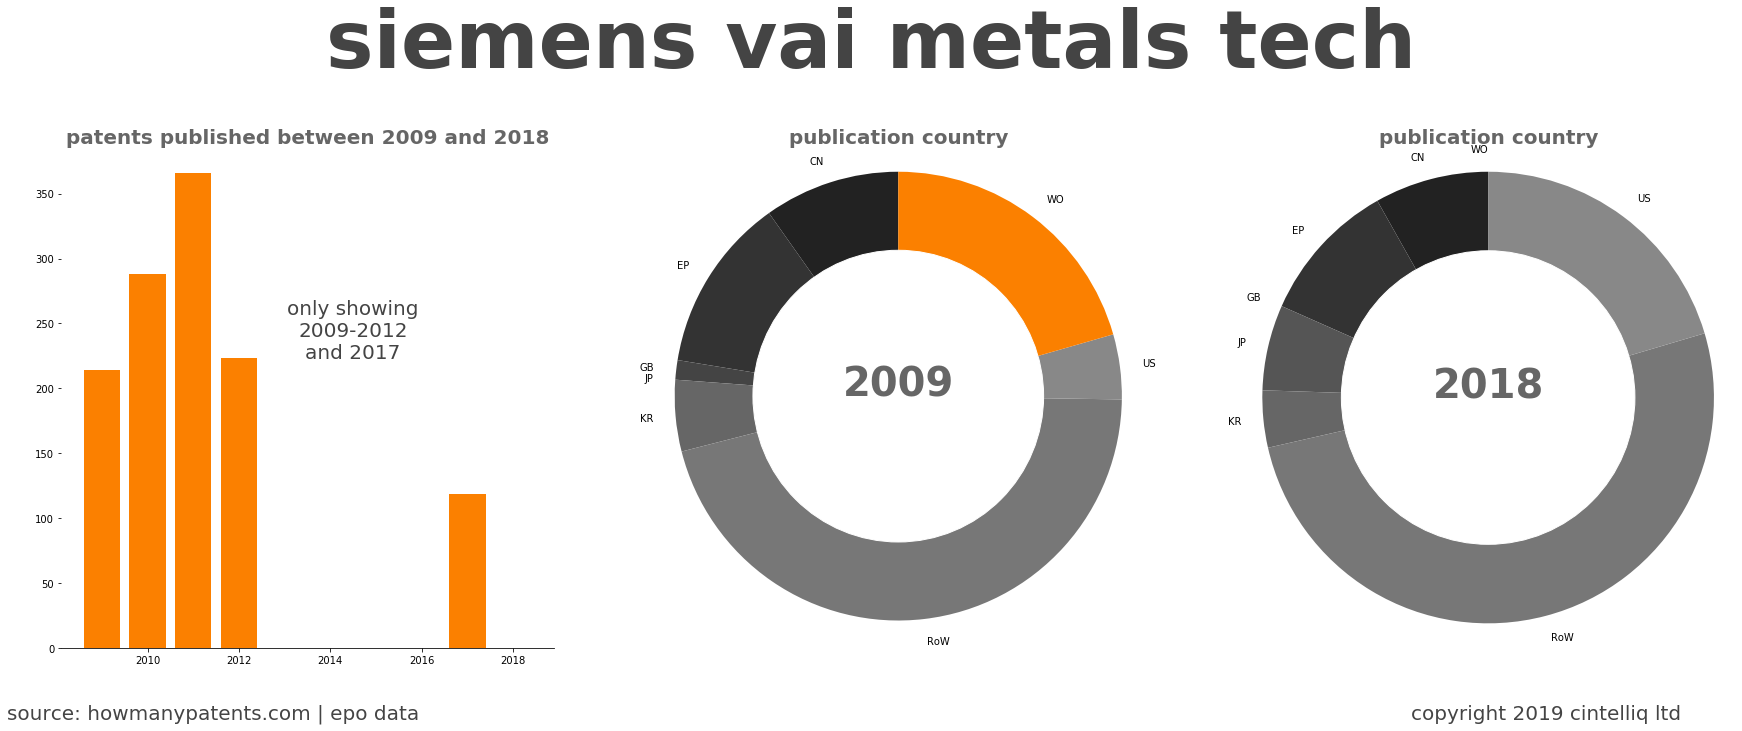 summary of patents for Siemens Vai Metals Tech